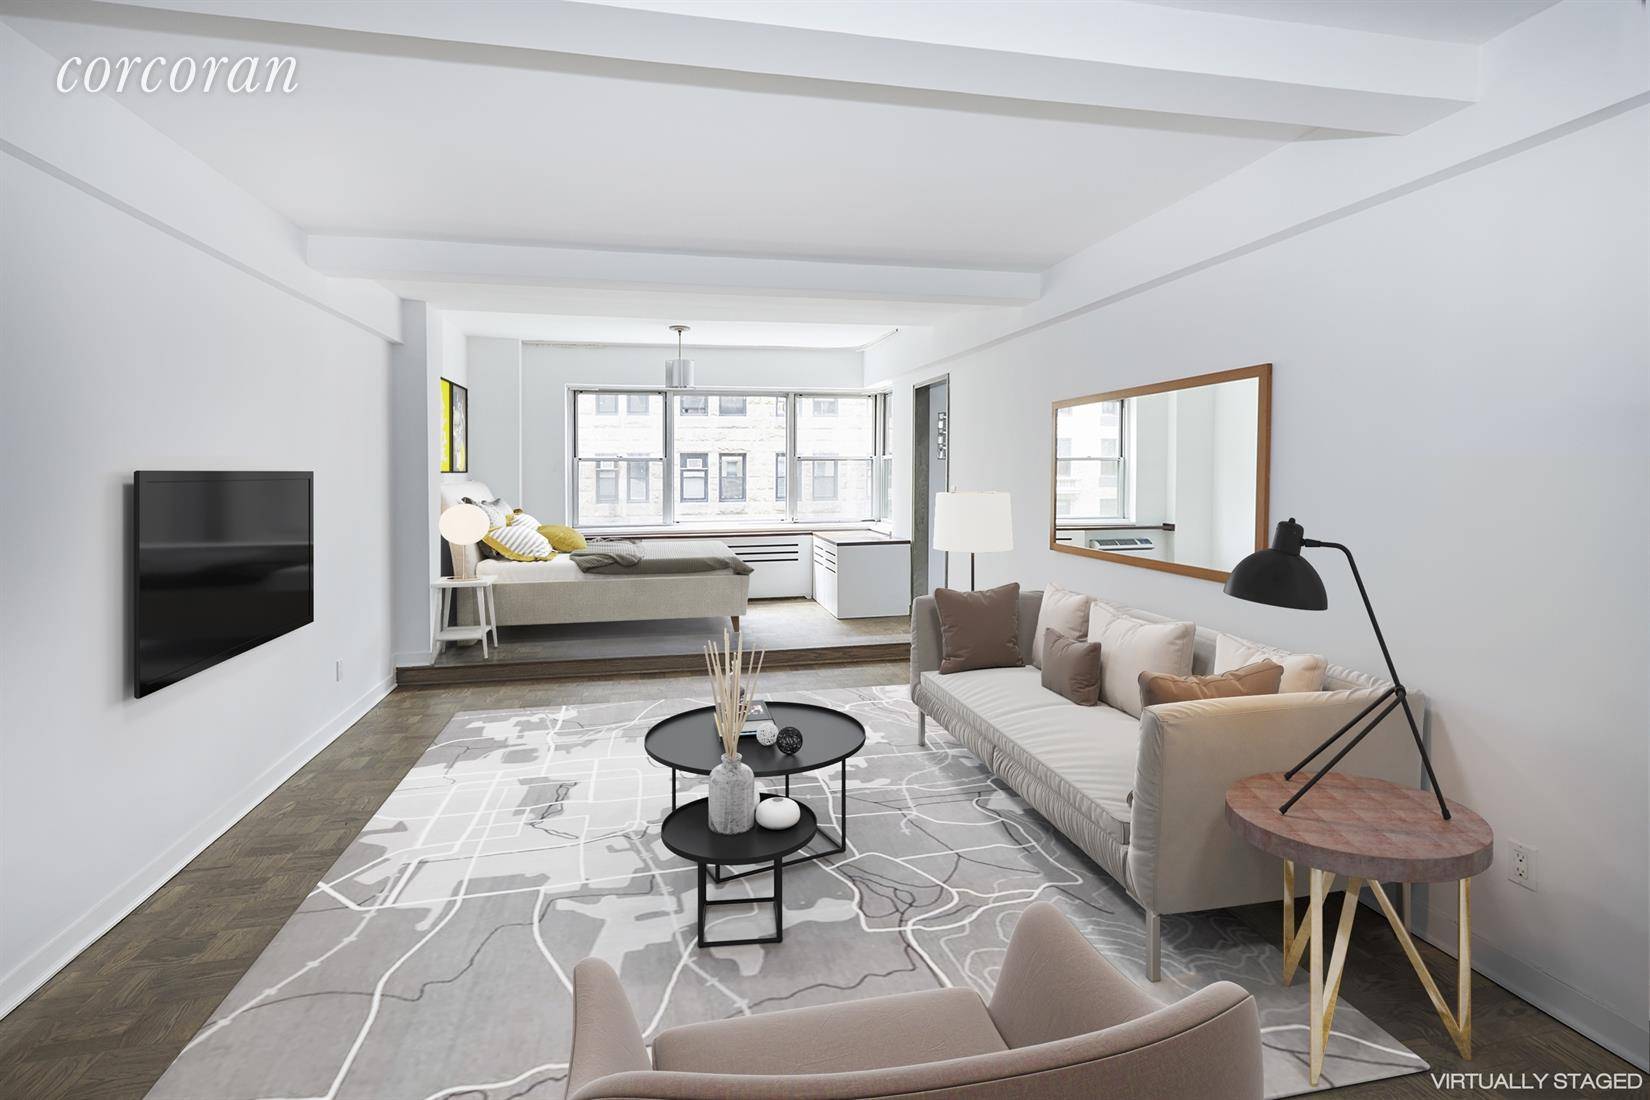 PARK GRAMERCY7 Lexington Avenue 7B is a chic, stylish studio in a full service, doorman building on one of the most beautiful blocks in the city.